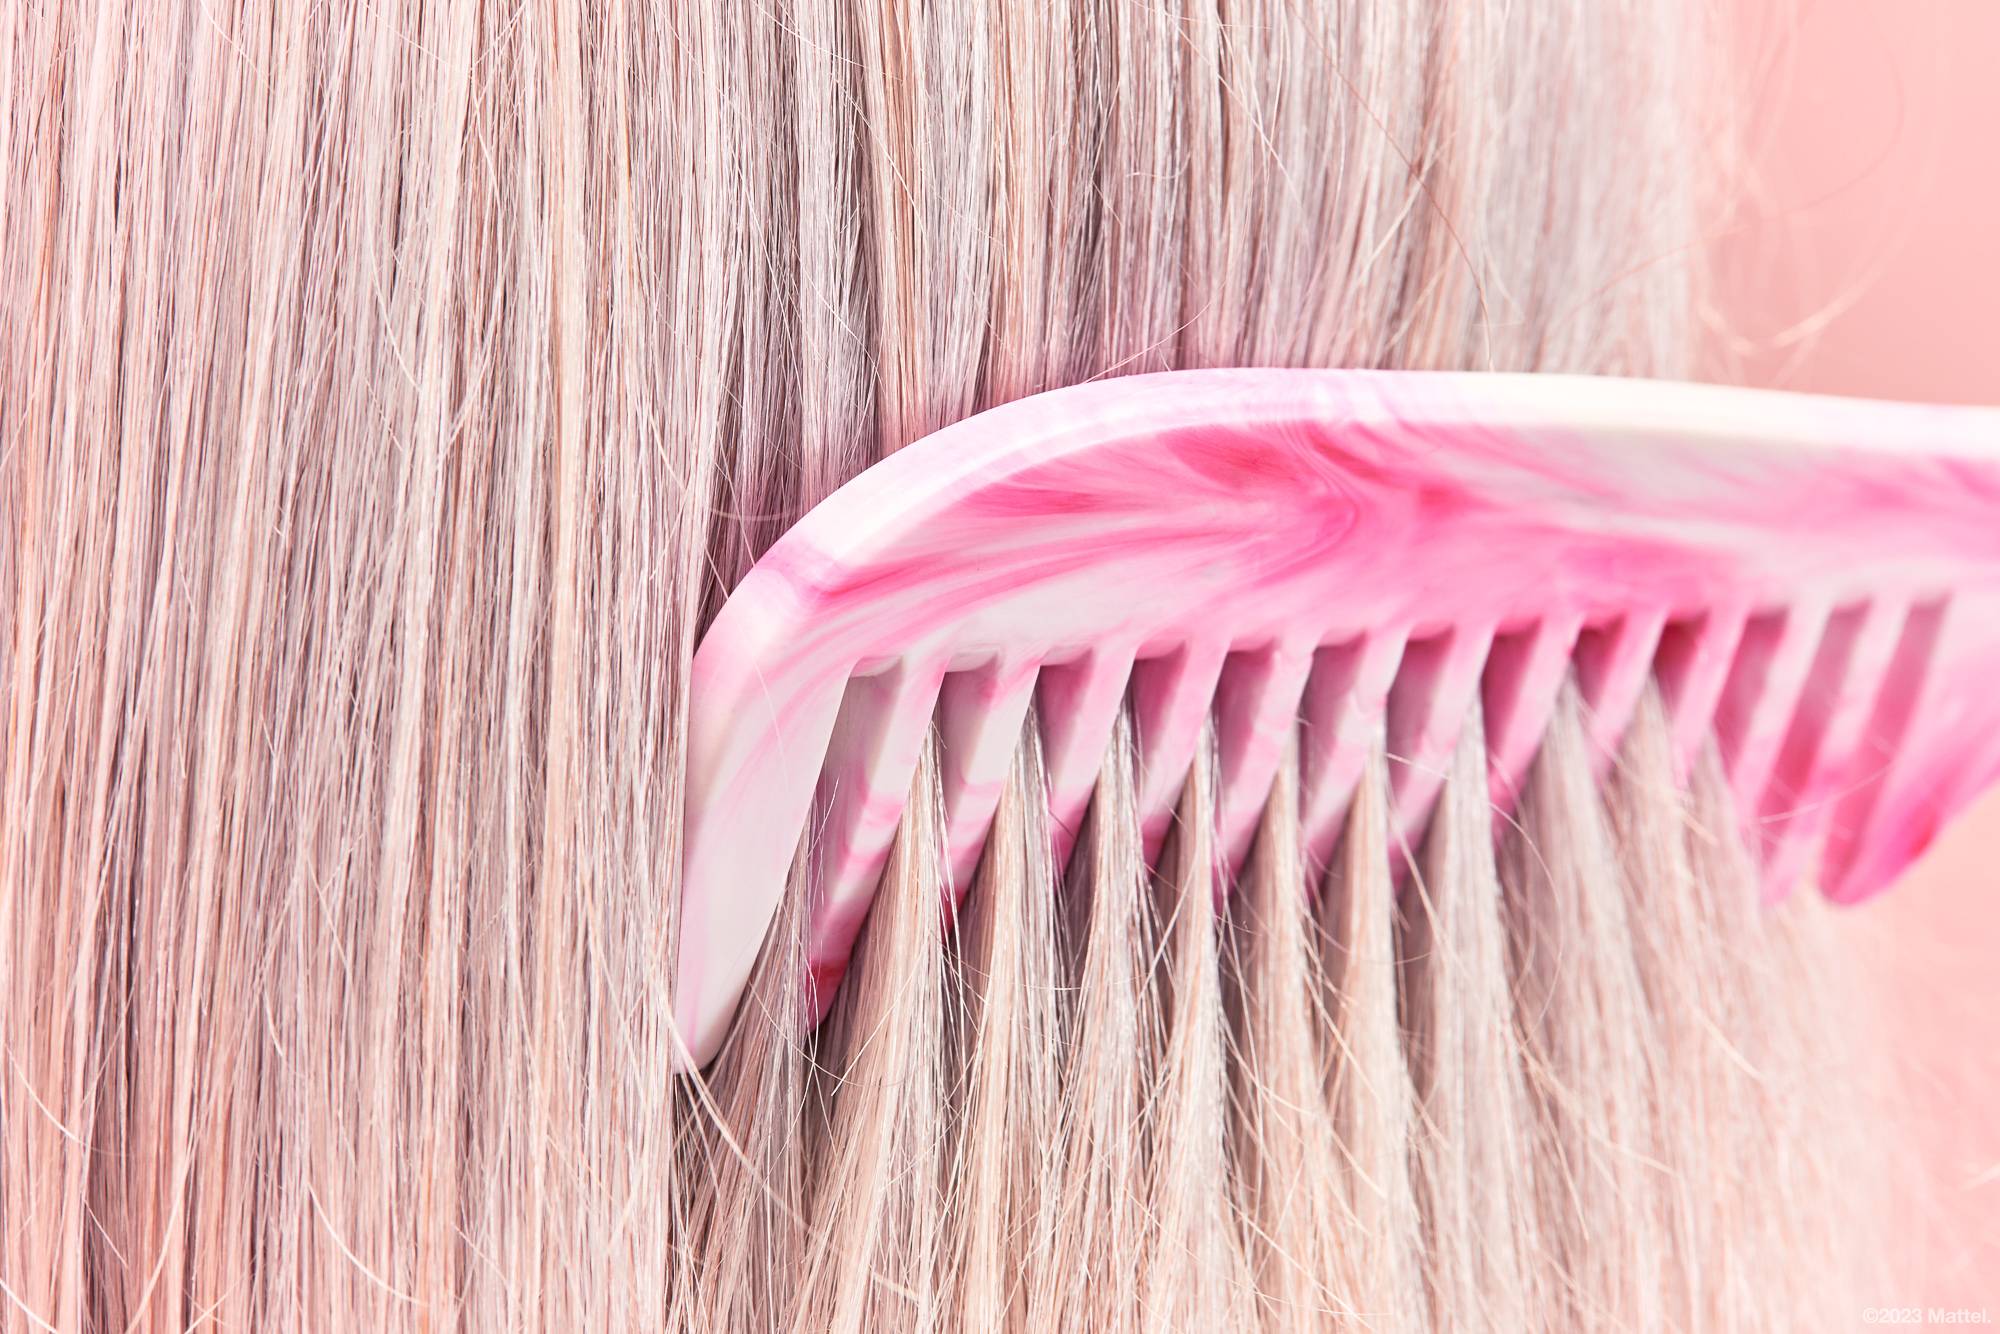 Image shows a super close-up of the marbled pink and white comb being brushed through straight blonde hair. 